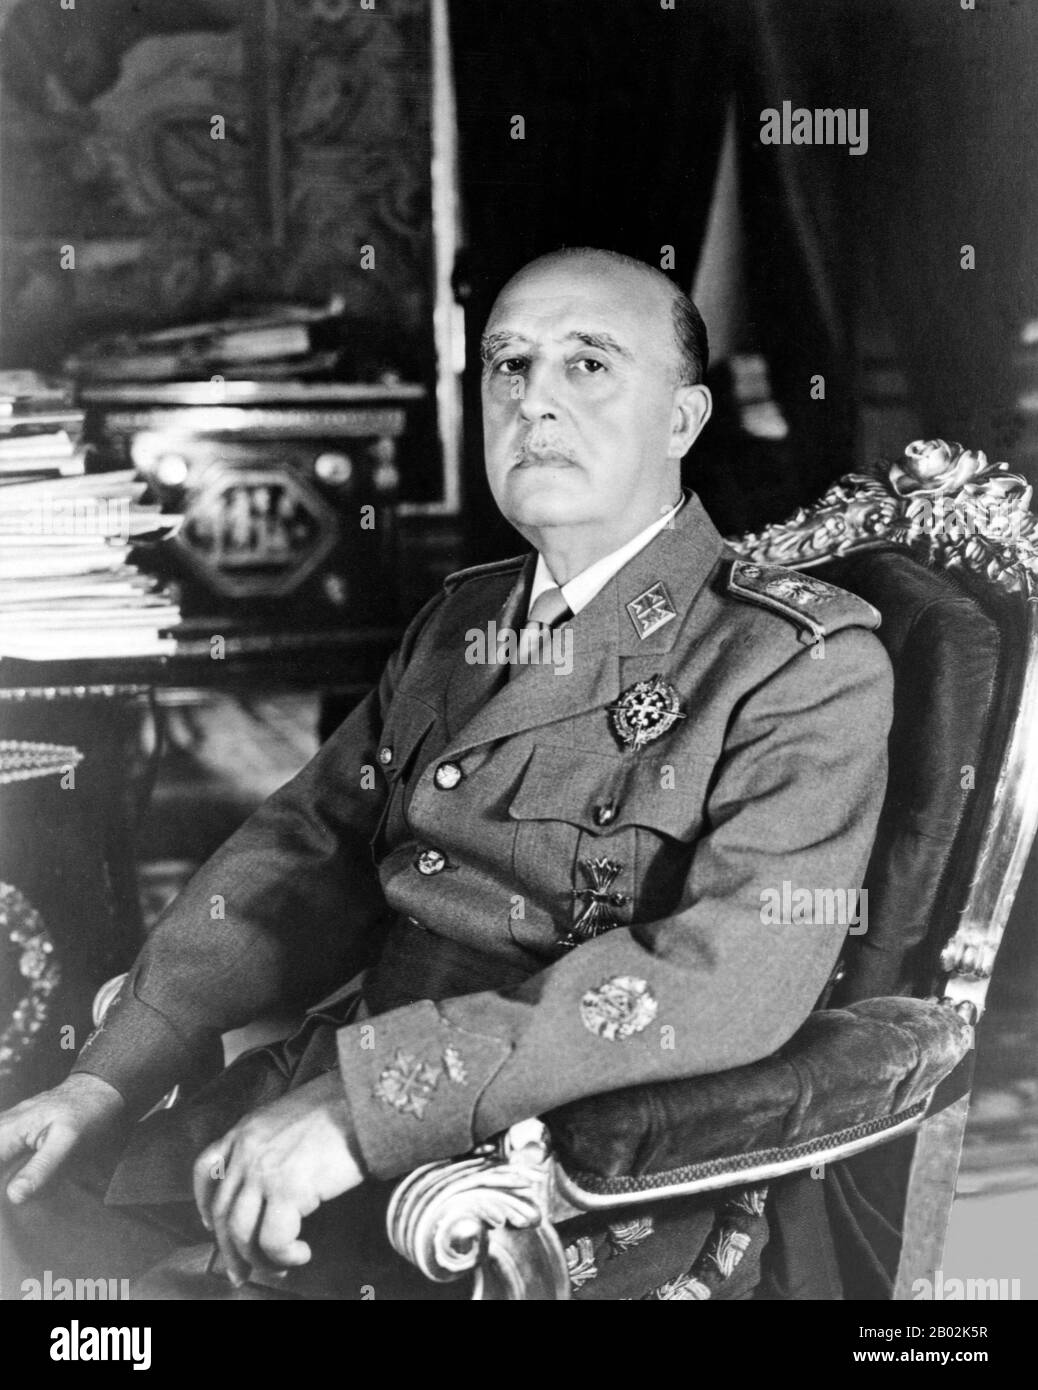 Francisco Franco Bahamonde (4 December 1892 – 20 November 1975) was the dictator of Spain from 1939 to his death in 1975.  A conservative, he was shocked when the monarchy was removed and replaced with a democratic republic in 1931. With the 1936 elections, the conservatives fell and the leftist Popular Front came to power. Looking to overthrow the republic, Franco and other generals staged a partially successful coup, which started the Spanish Civil War. With the death of the other generals, Franco quickly became his faction's only leader.  Franco received military support from local fascist, Stock Photo